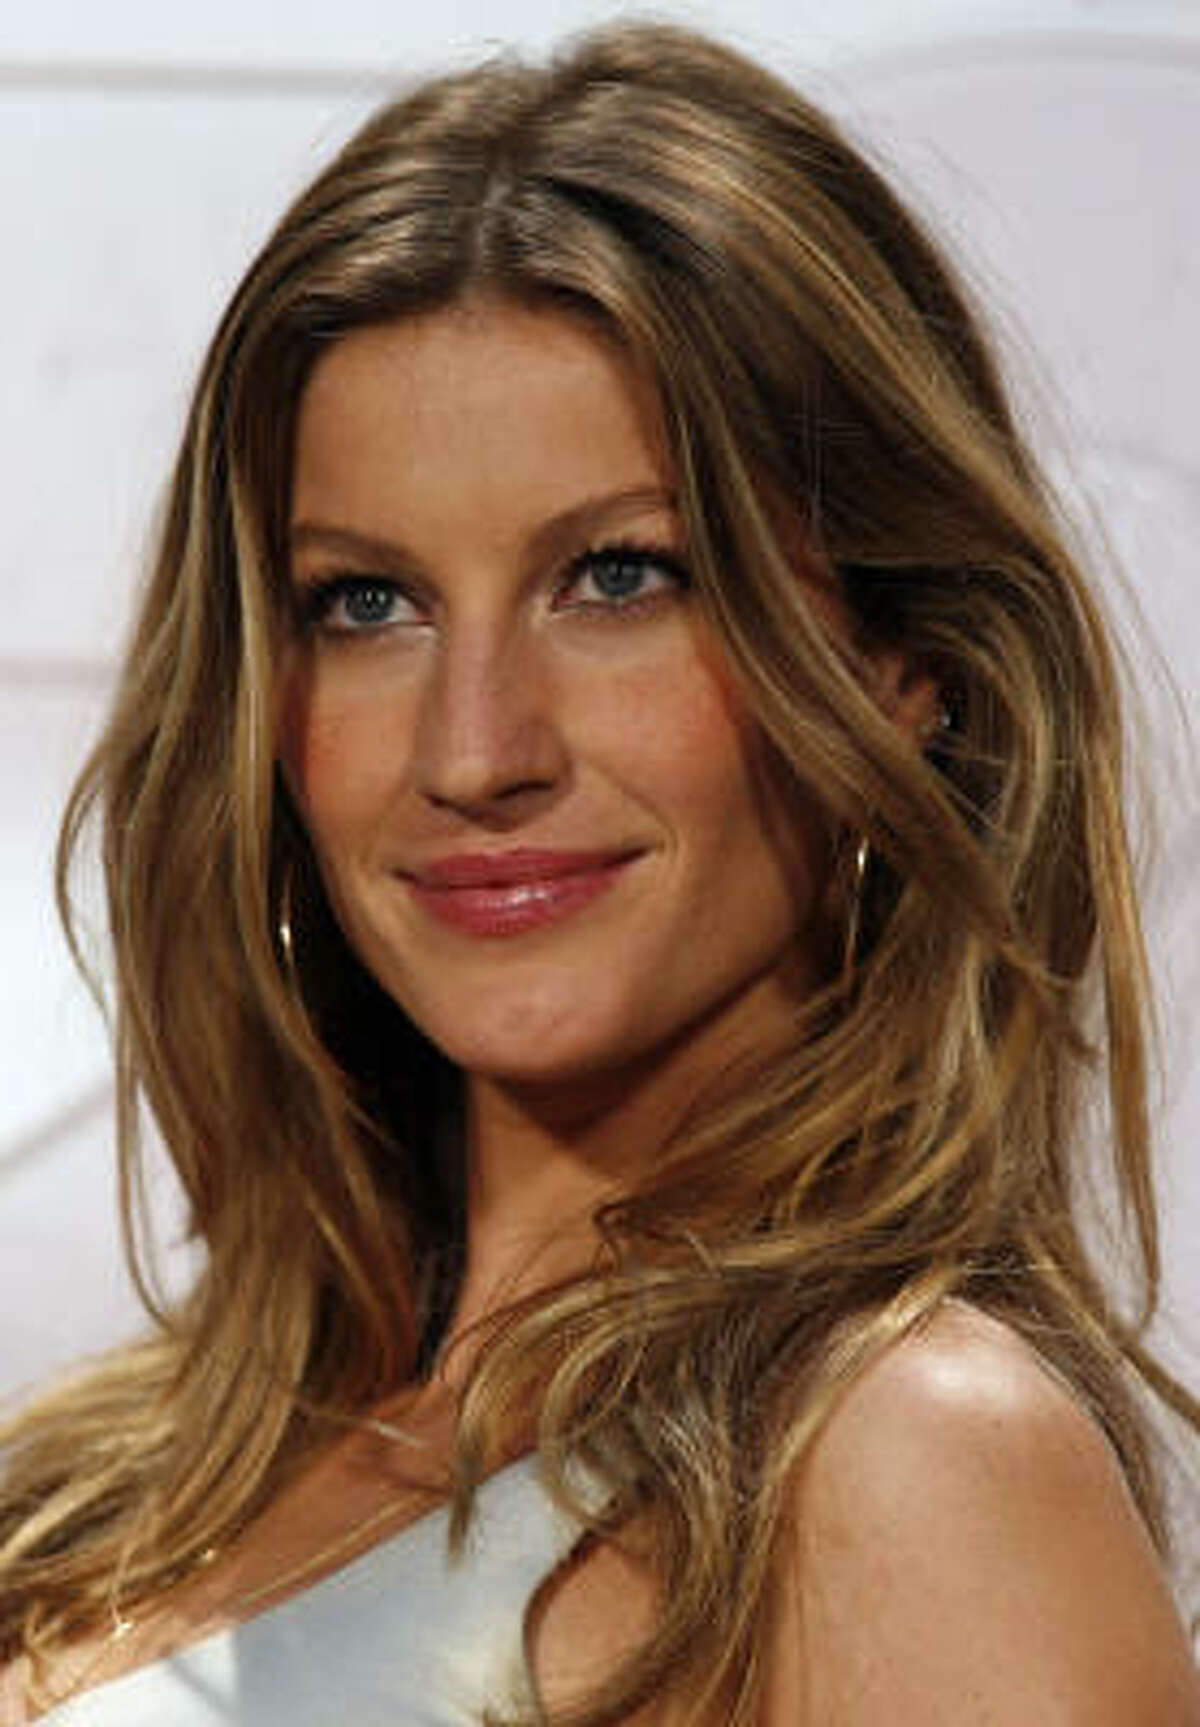 Model Gisele Bundchen and her husband, Tom Brady of the New England Patriots, have a baby boy.